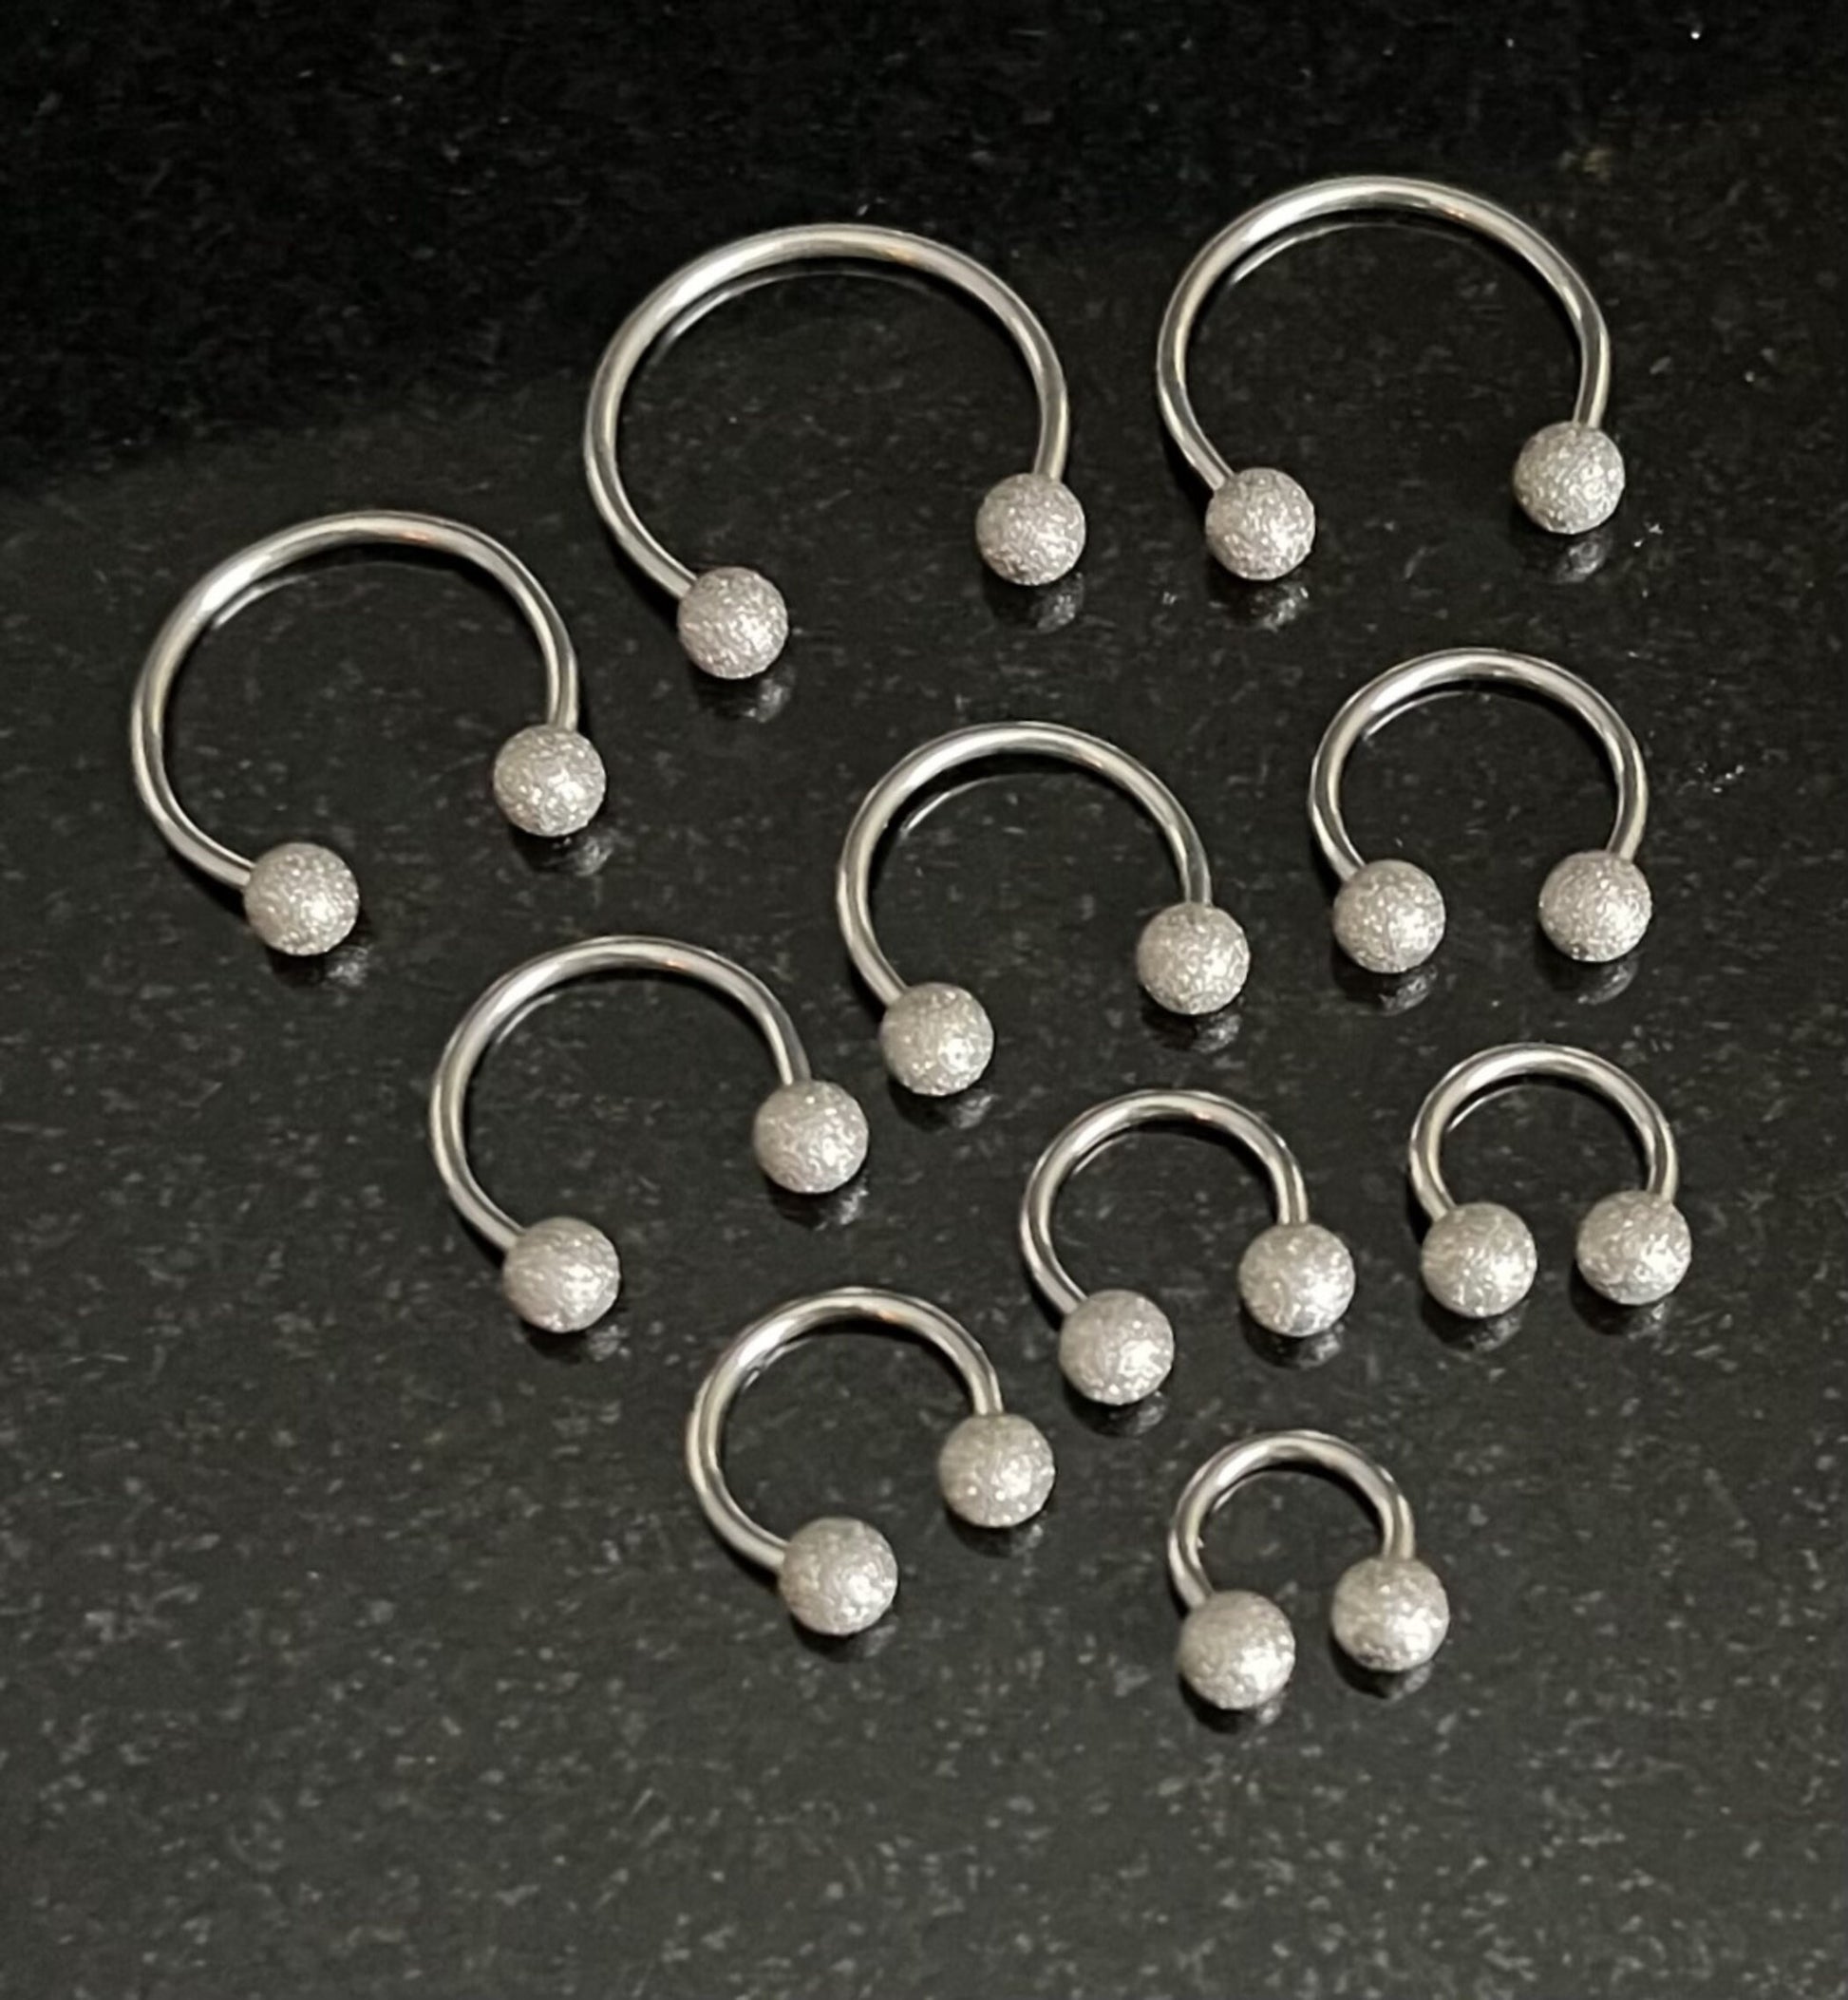 1 Piece Frosted Balls Circular Surgical Steel Horseshoe Circular Septum Ring - 16g, 1/4" (6mm) thru 5/8" (16mm) Available in 3mm, 4mm & 5mm!